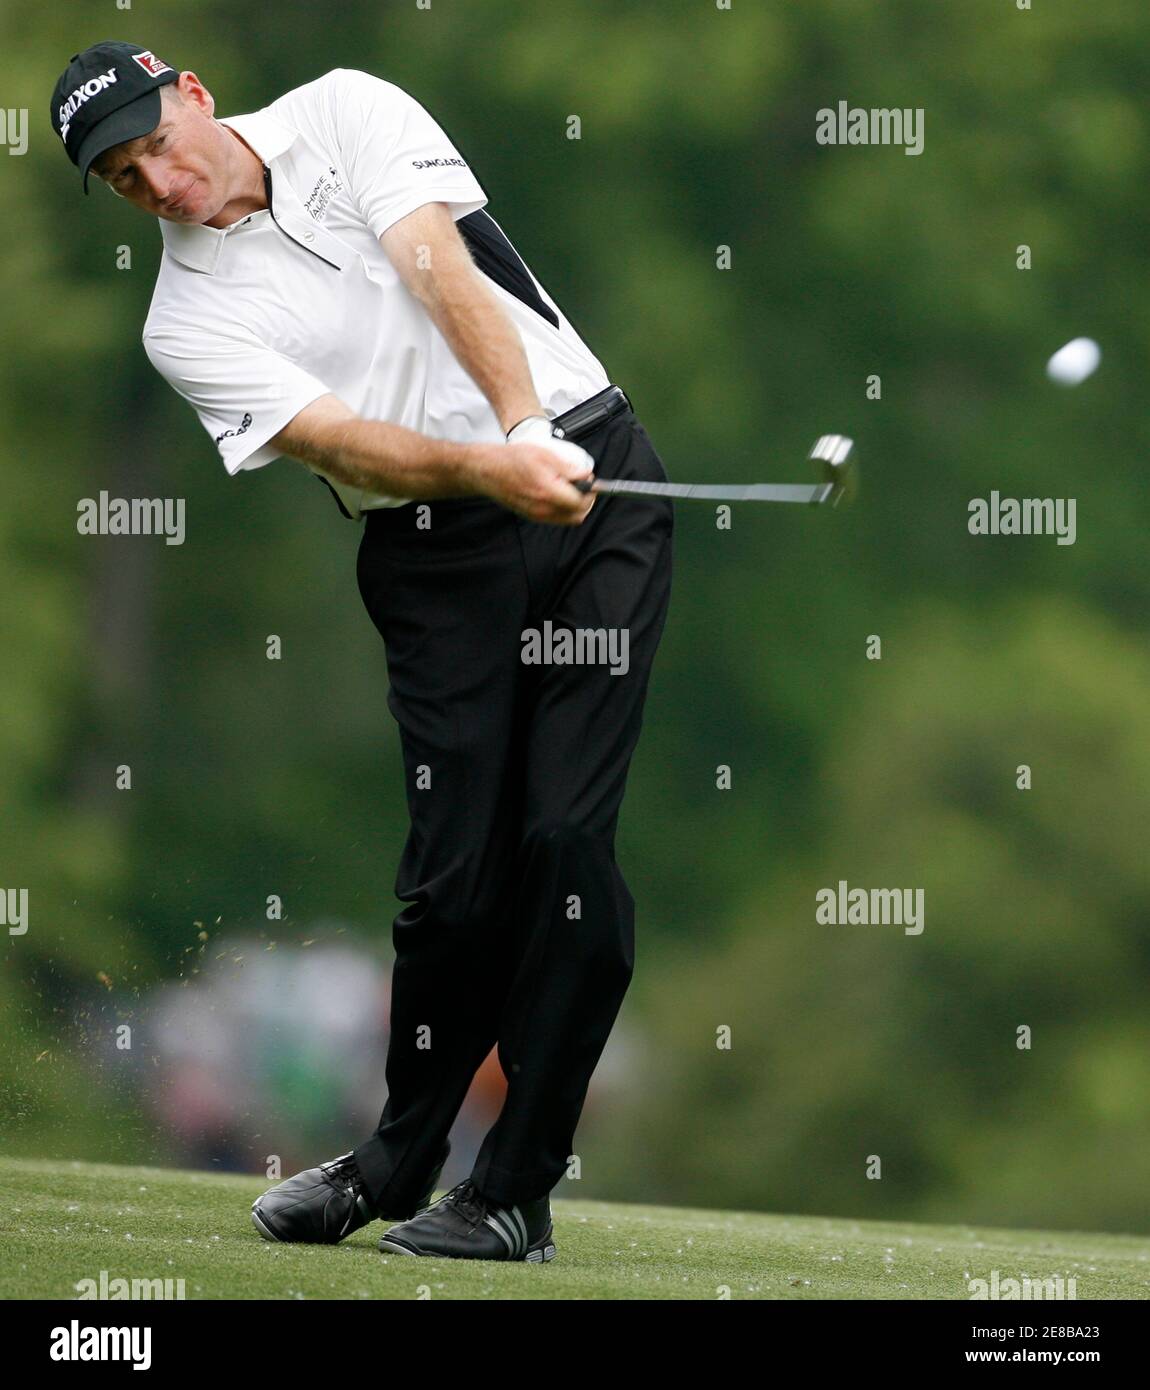 Jim Furyk of the United States hits from the fairway at the 11th hole during the final round of the Quail Hollow Championship in Charlotte, North Carolina May 2, 2010. REUTERS/Jason Miczek (UNITED STATES - Tags: SPORT GOLF) Stock Photo